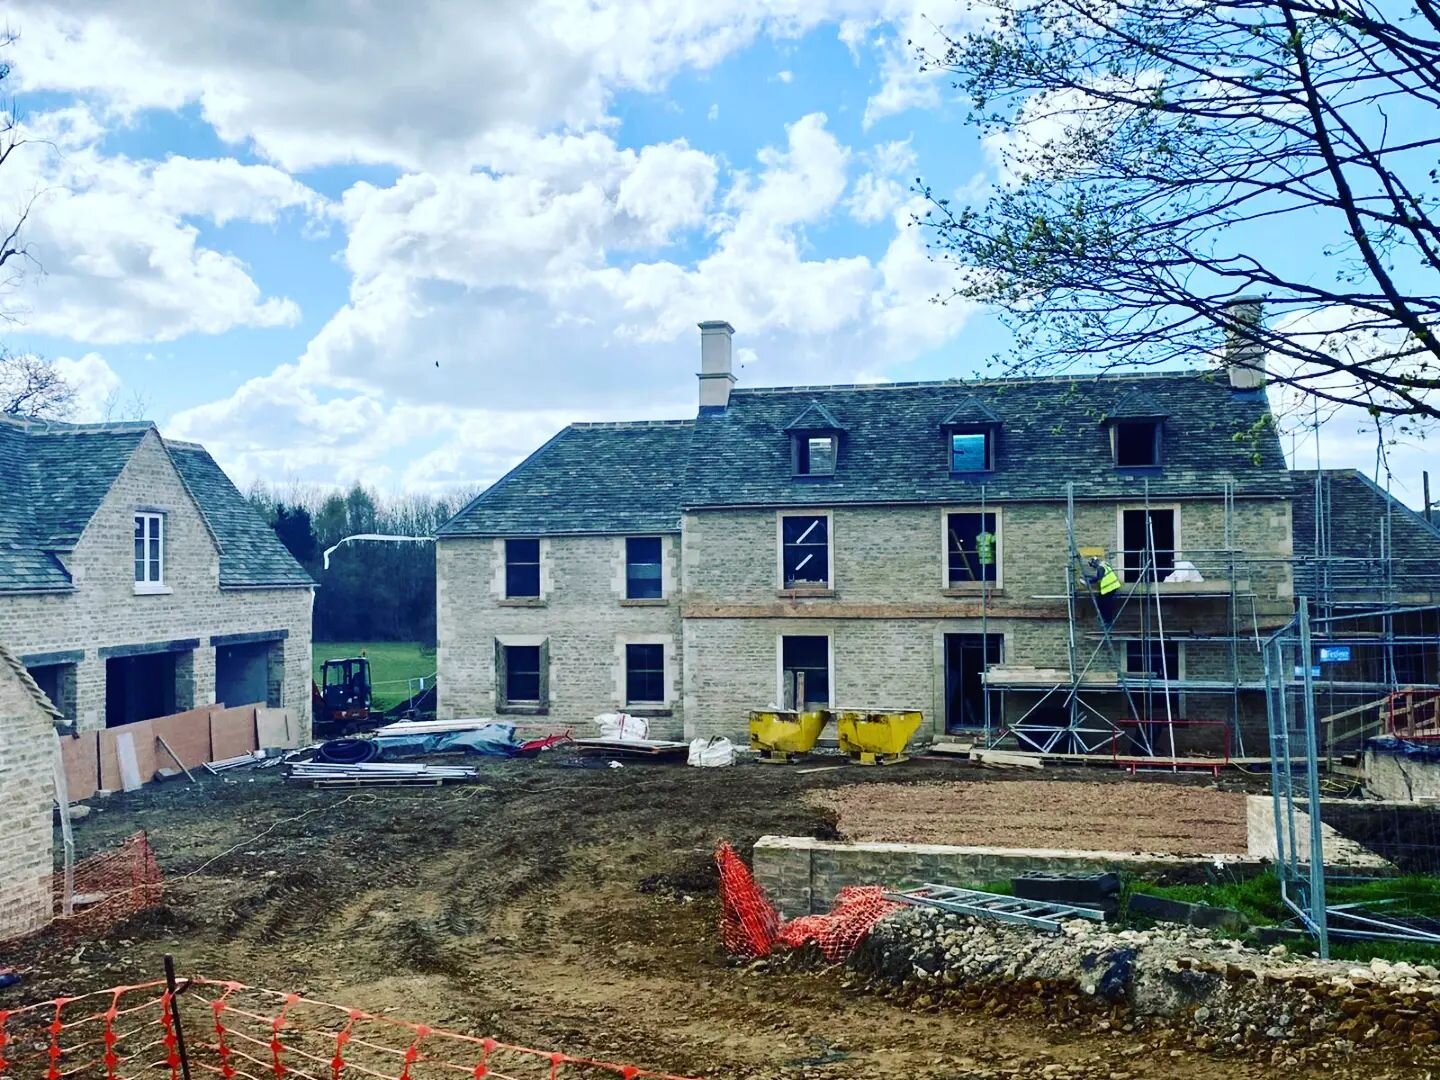 Scaffolding down! This wonderful project is now taking shape very quickly 🏠

Beautifully designed by Flemings Architects and painstakingly built and managed by Zota Construction 

@fleming_architects 
@zotaconstruction 

#clarefontesinteriors #flemi